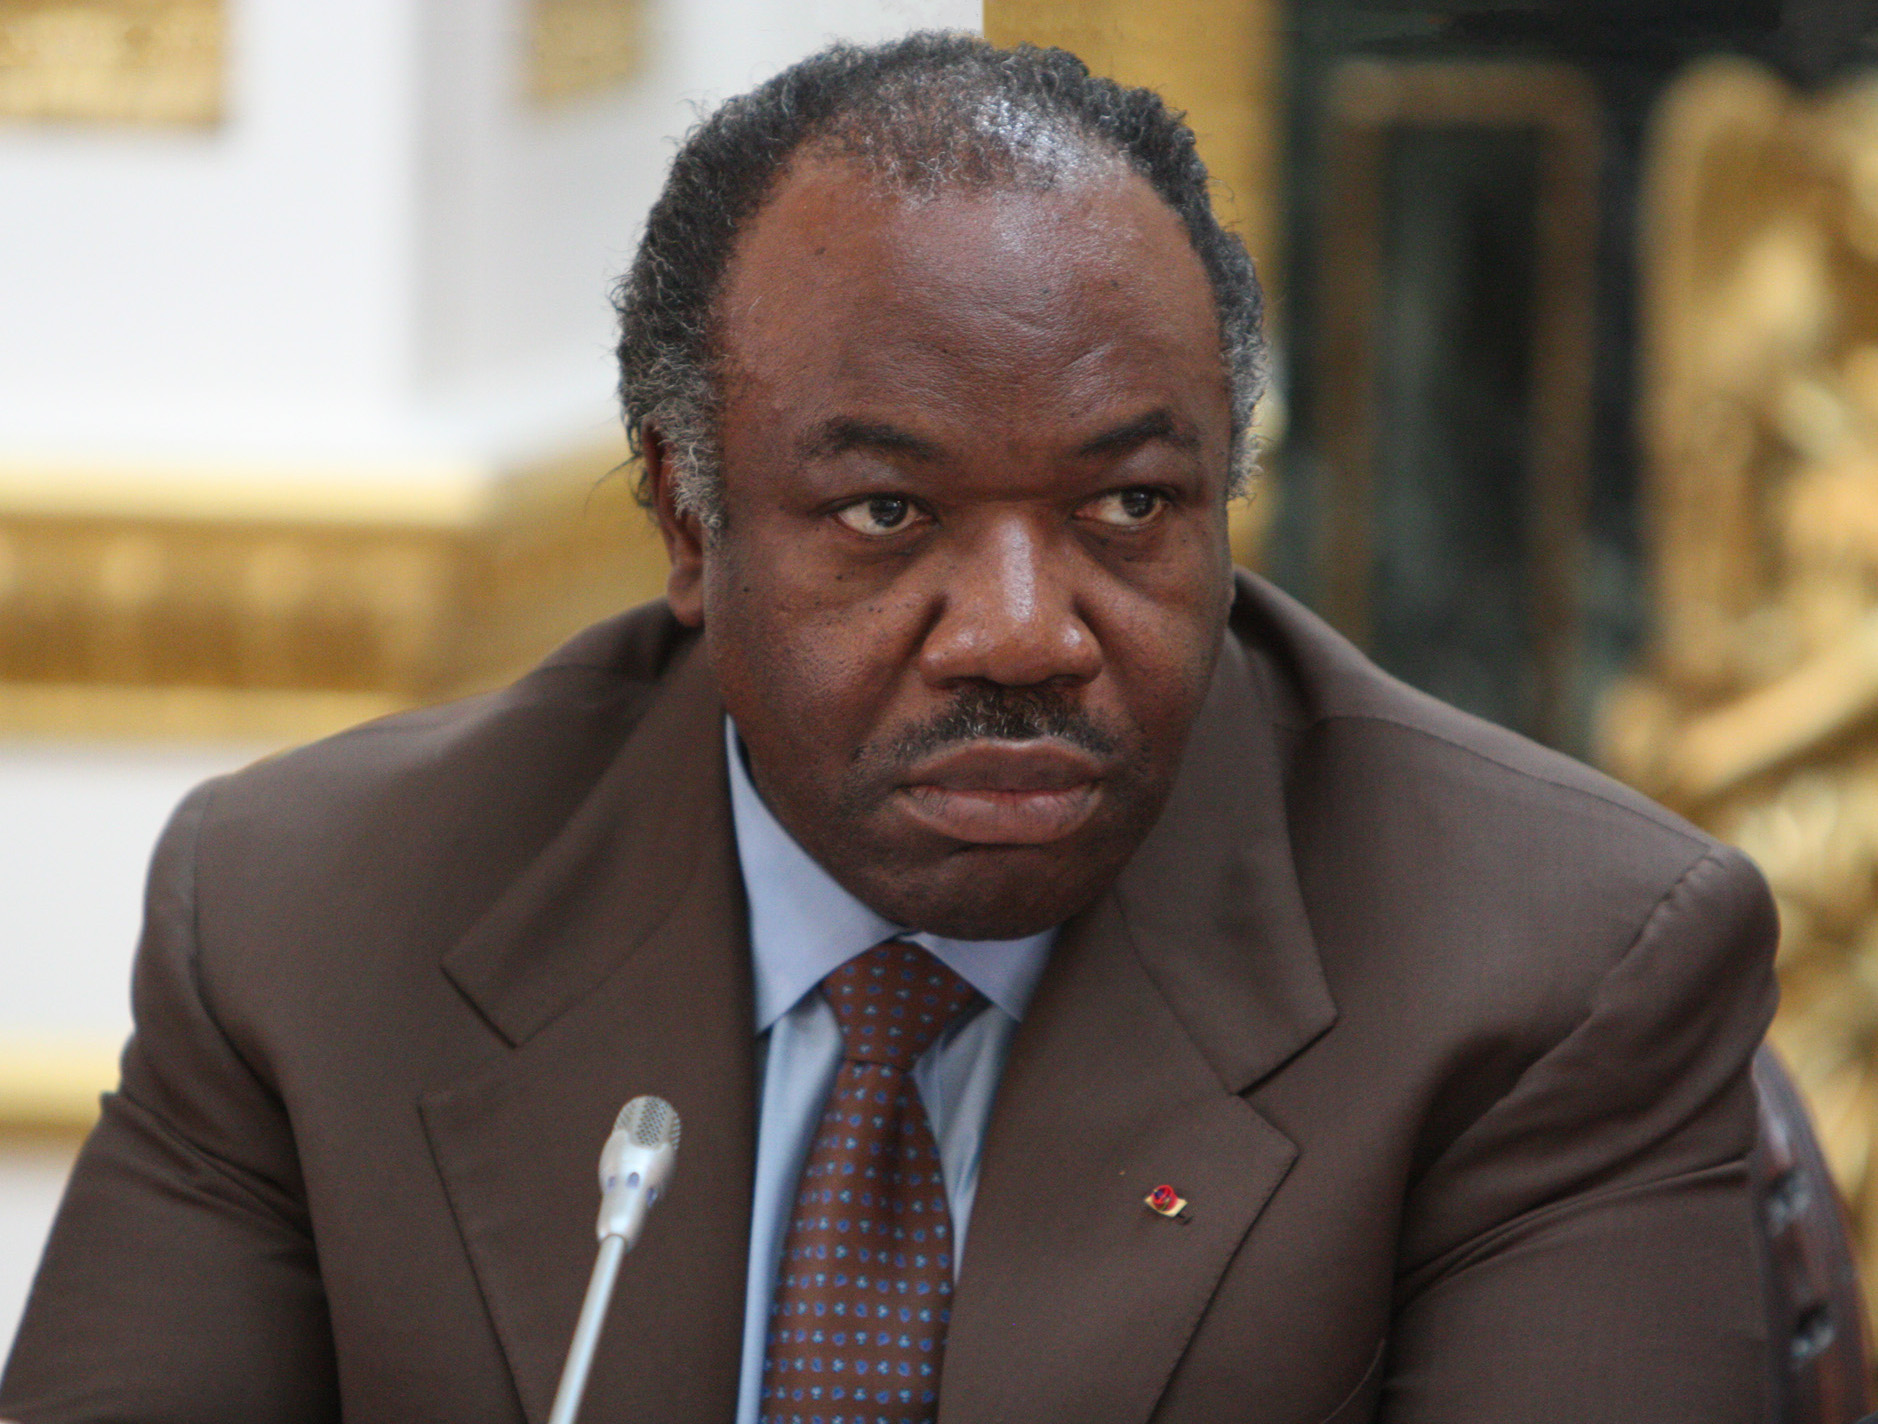 Ali Bongo Ondimba - The biggest clown of all. History will remember this one as a toad par excellence.